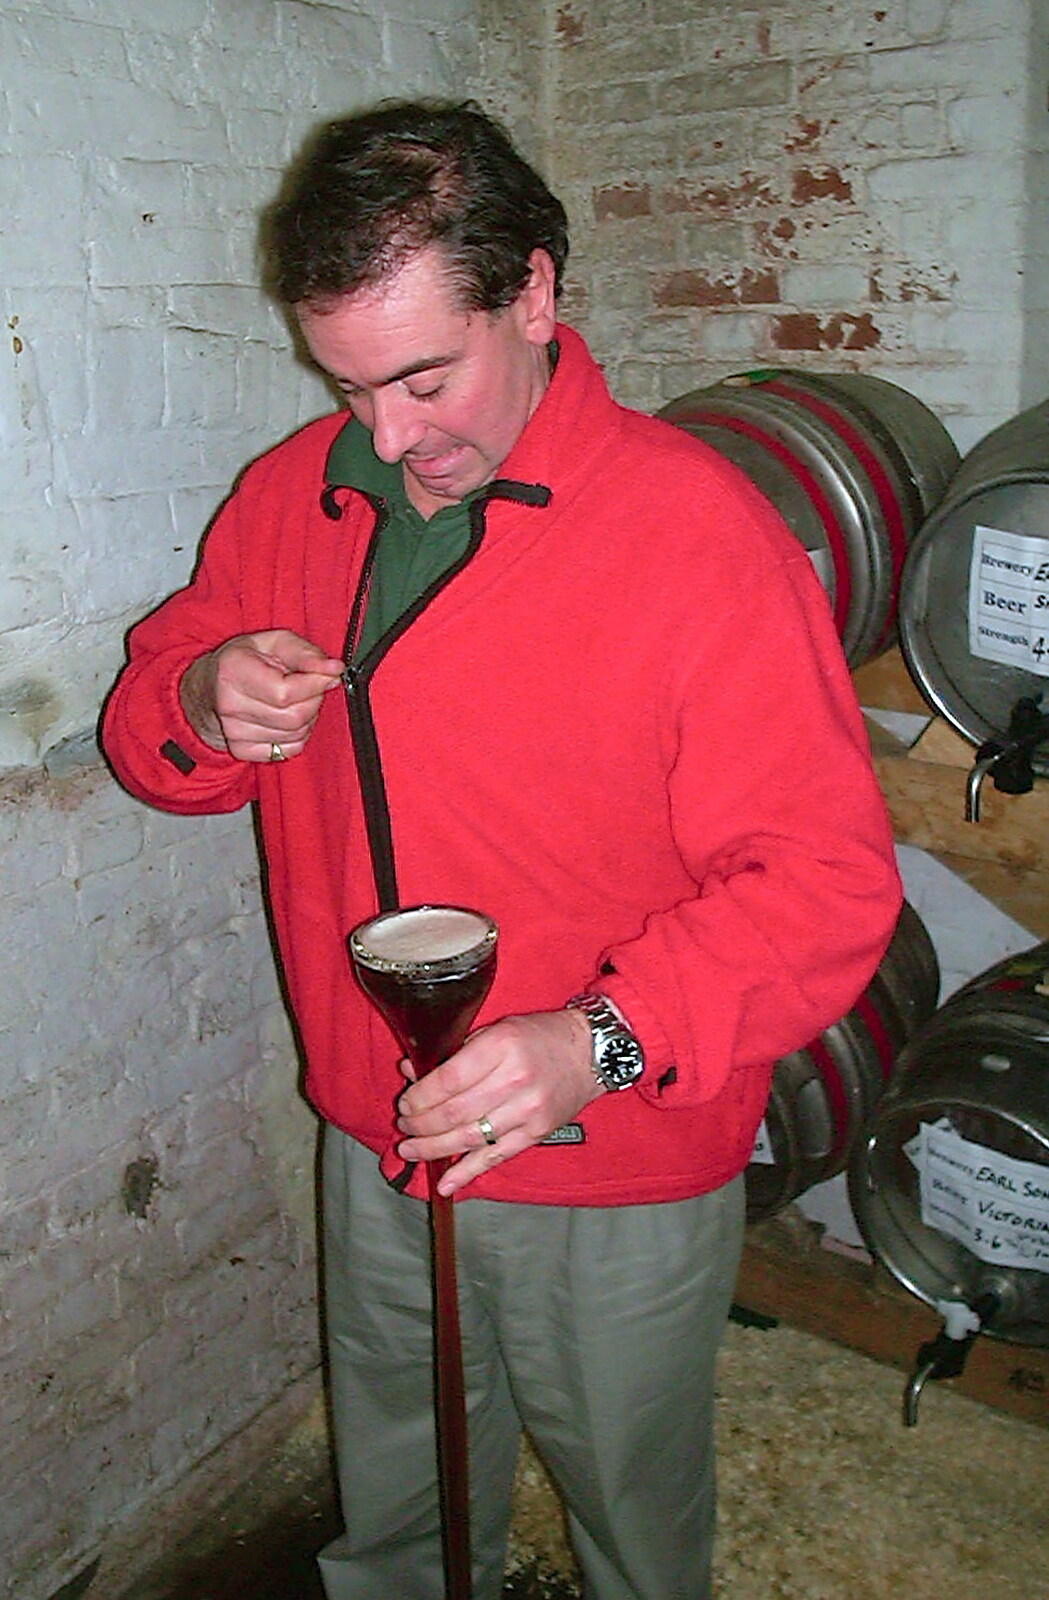 The landlord prepares to do a yard of ale from The Hoxne Beer Festival, Suffolk - 20th May 2002